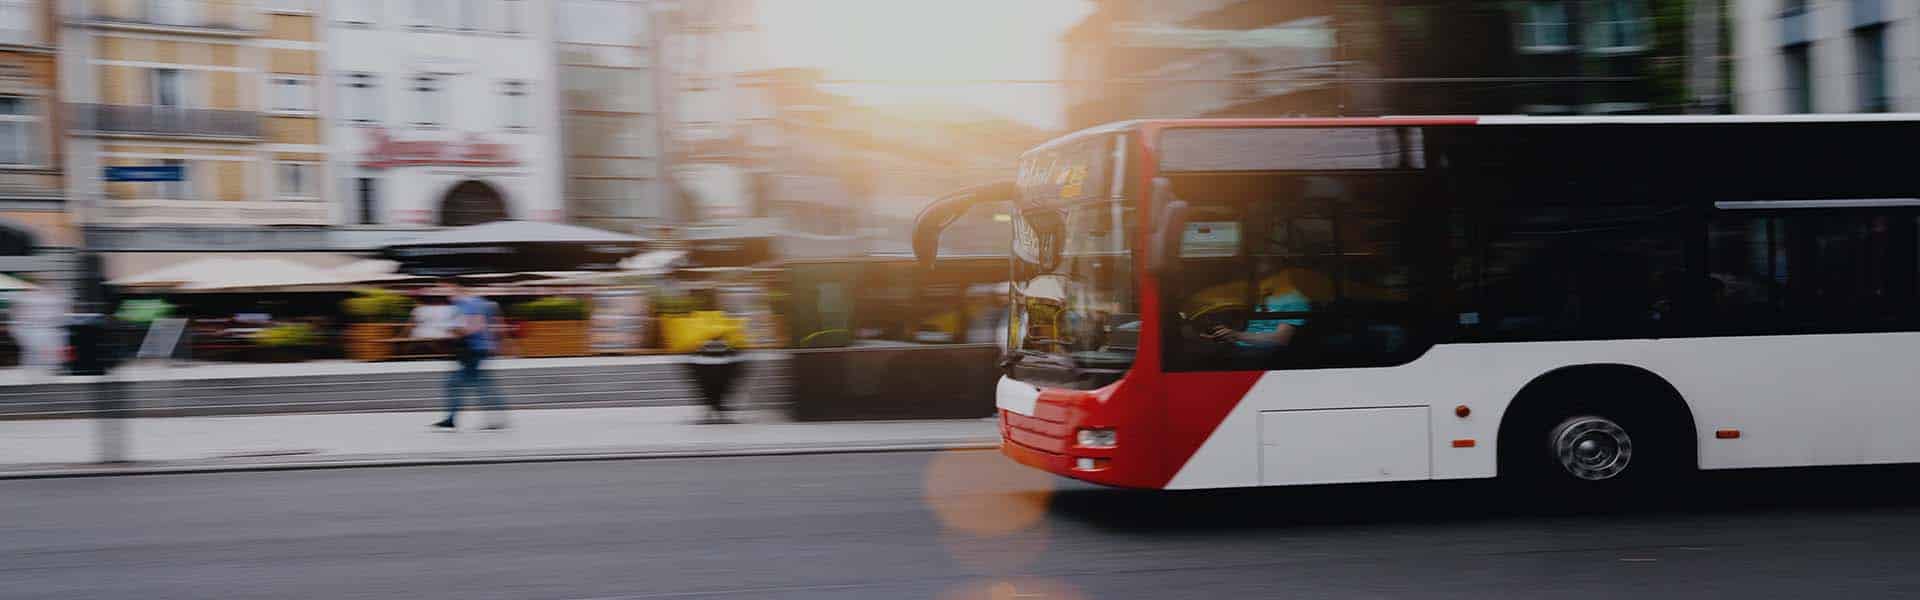 bus accident law firms